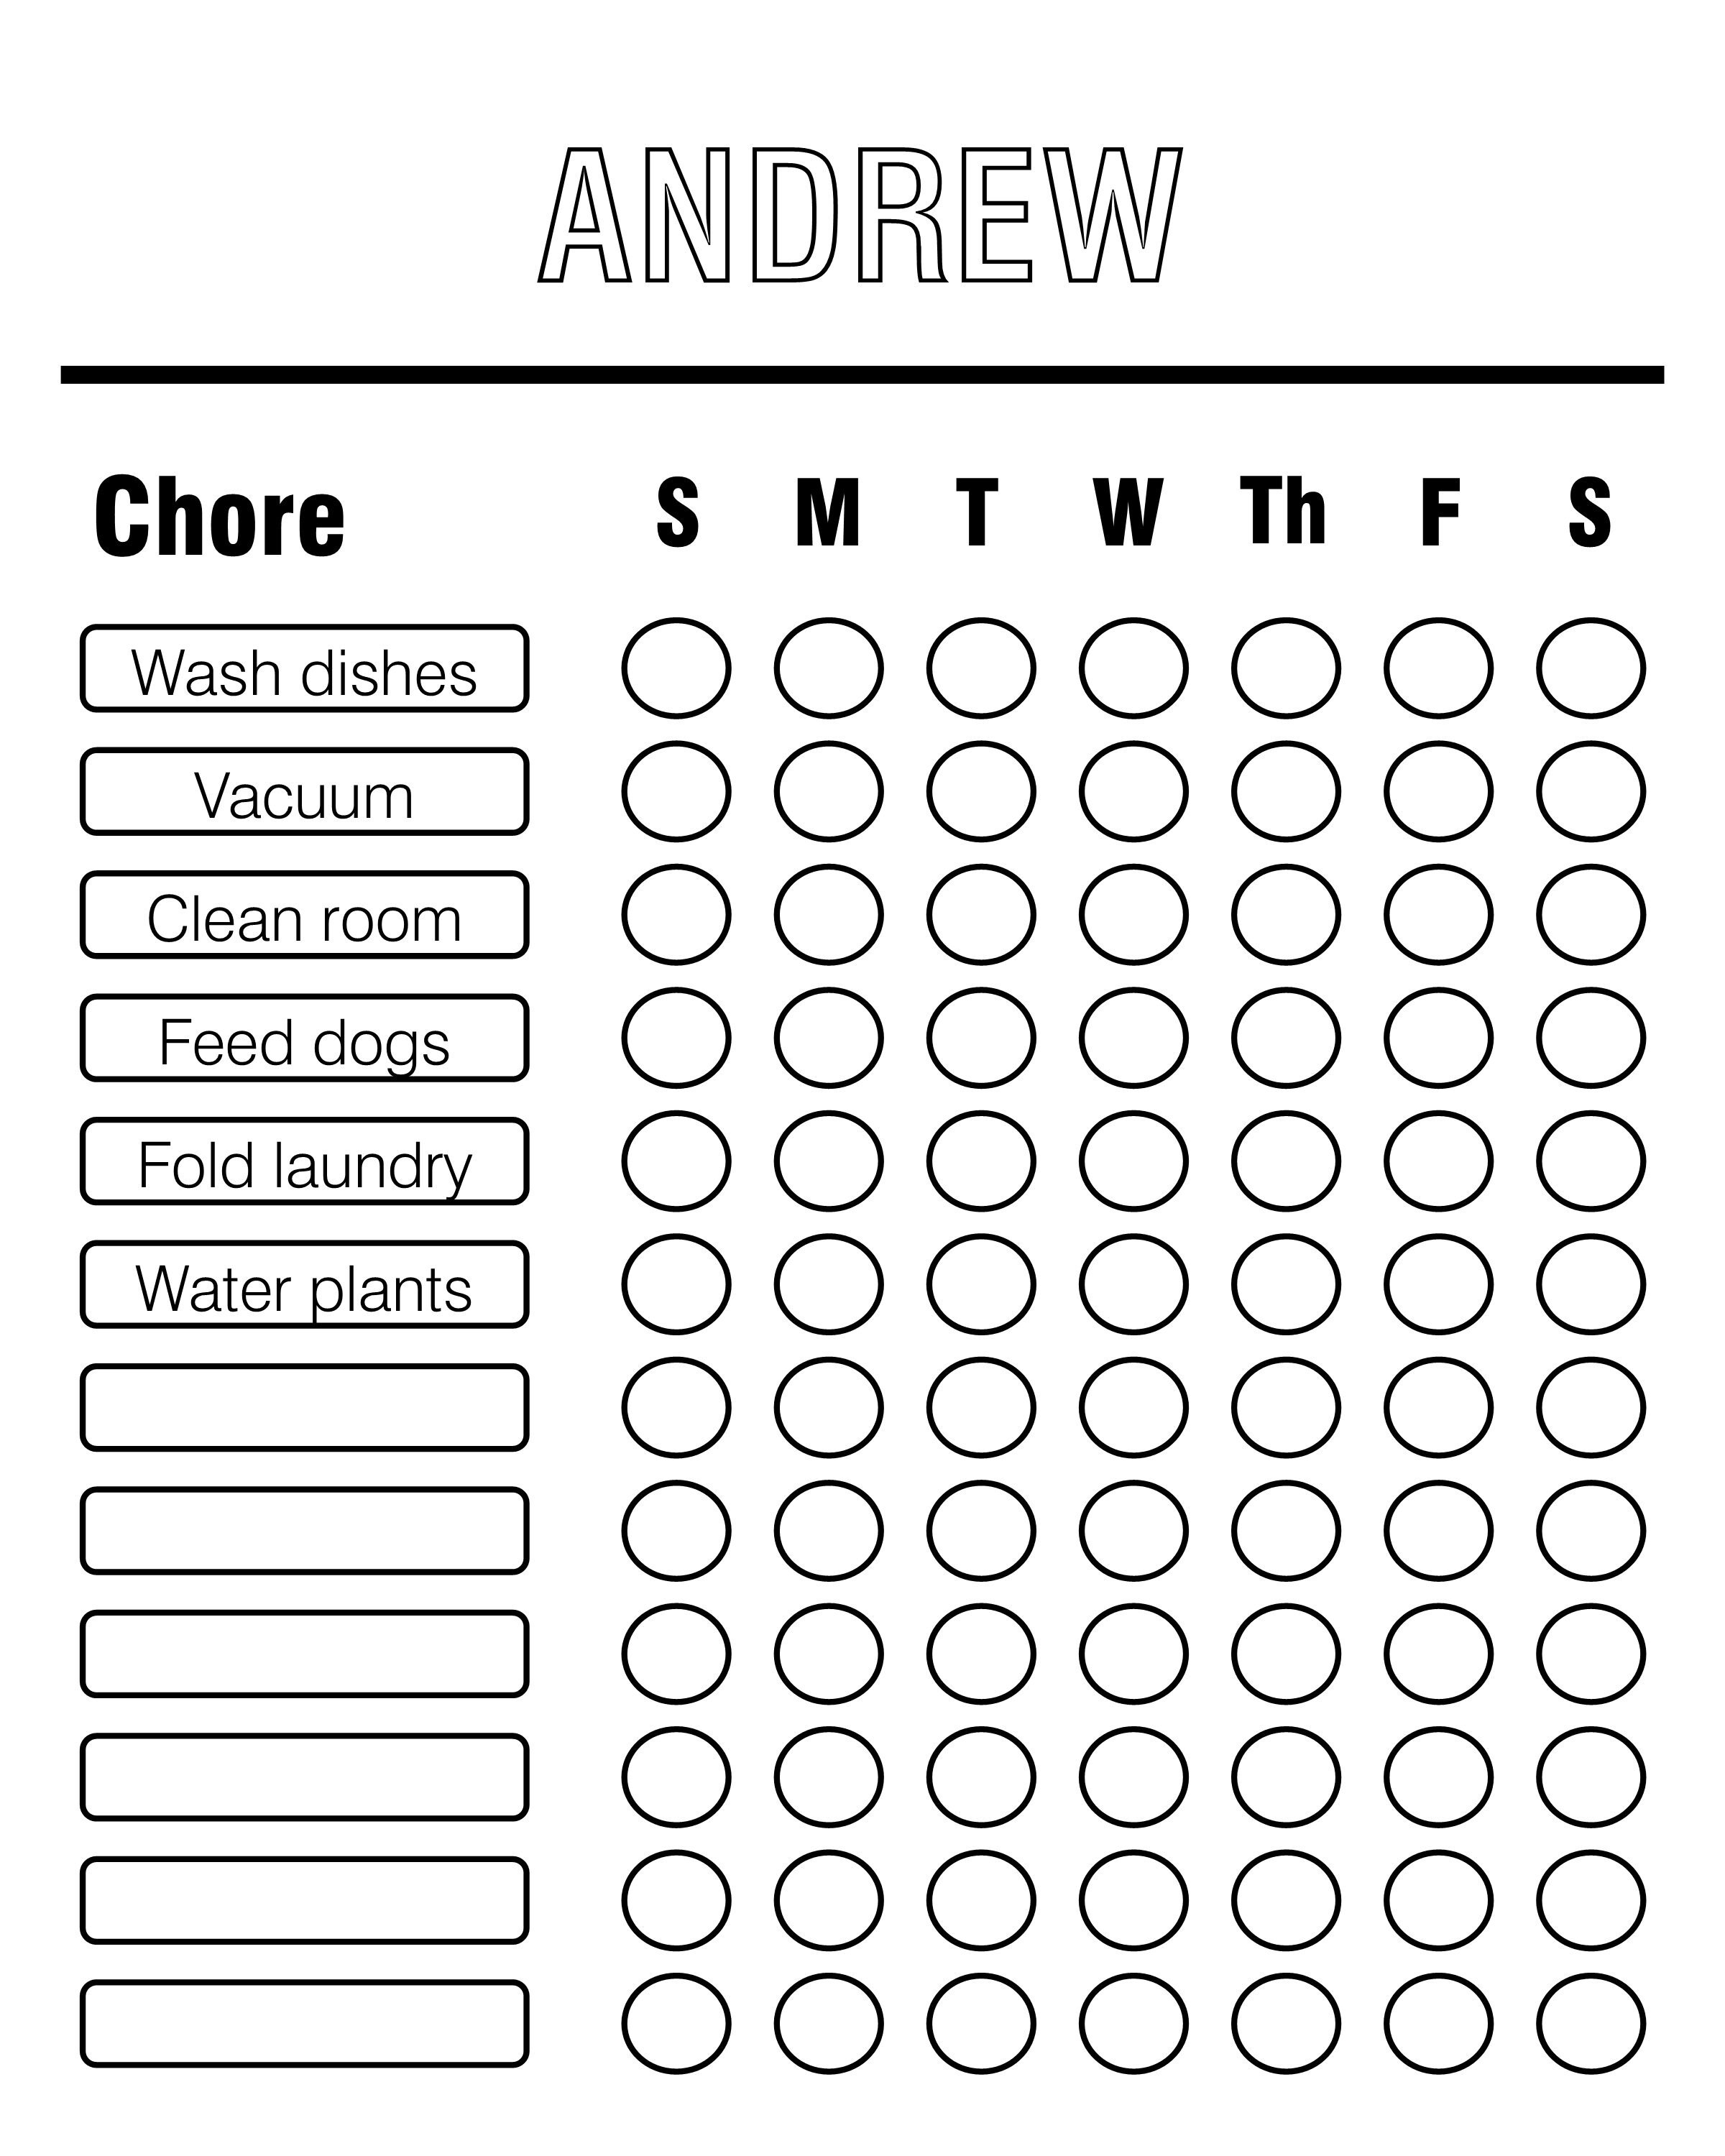 personalized-chore-chart-for-kids-printable-digital-print-out-task